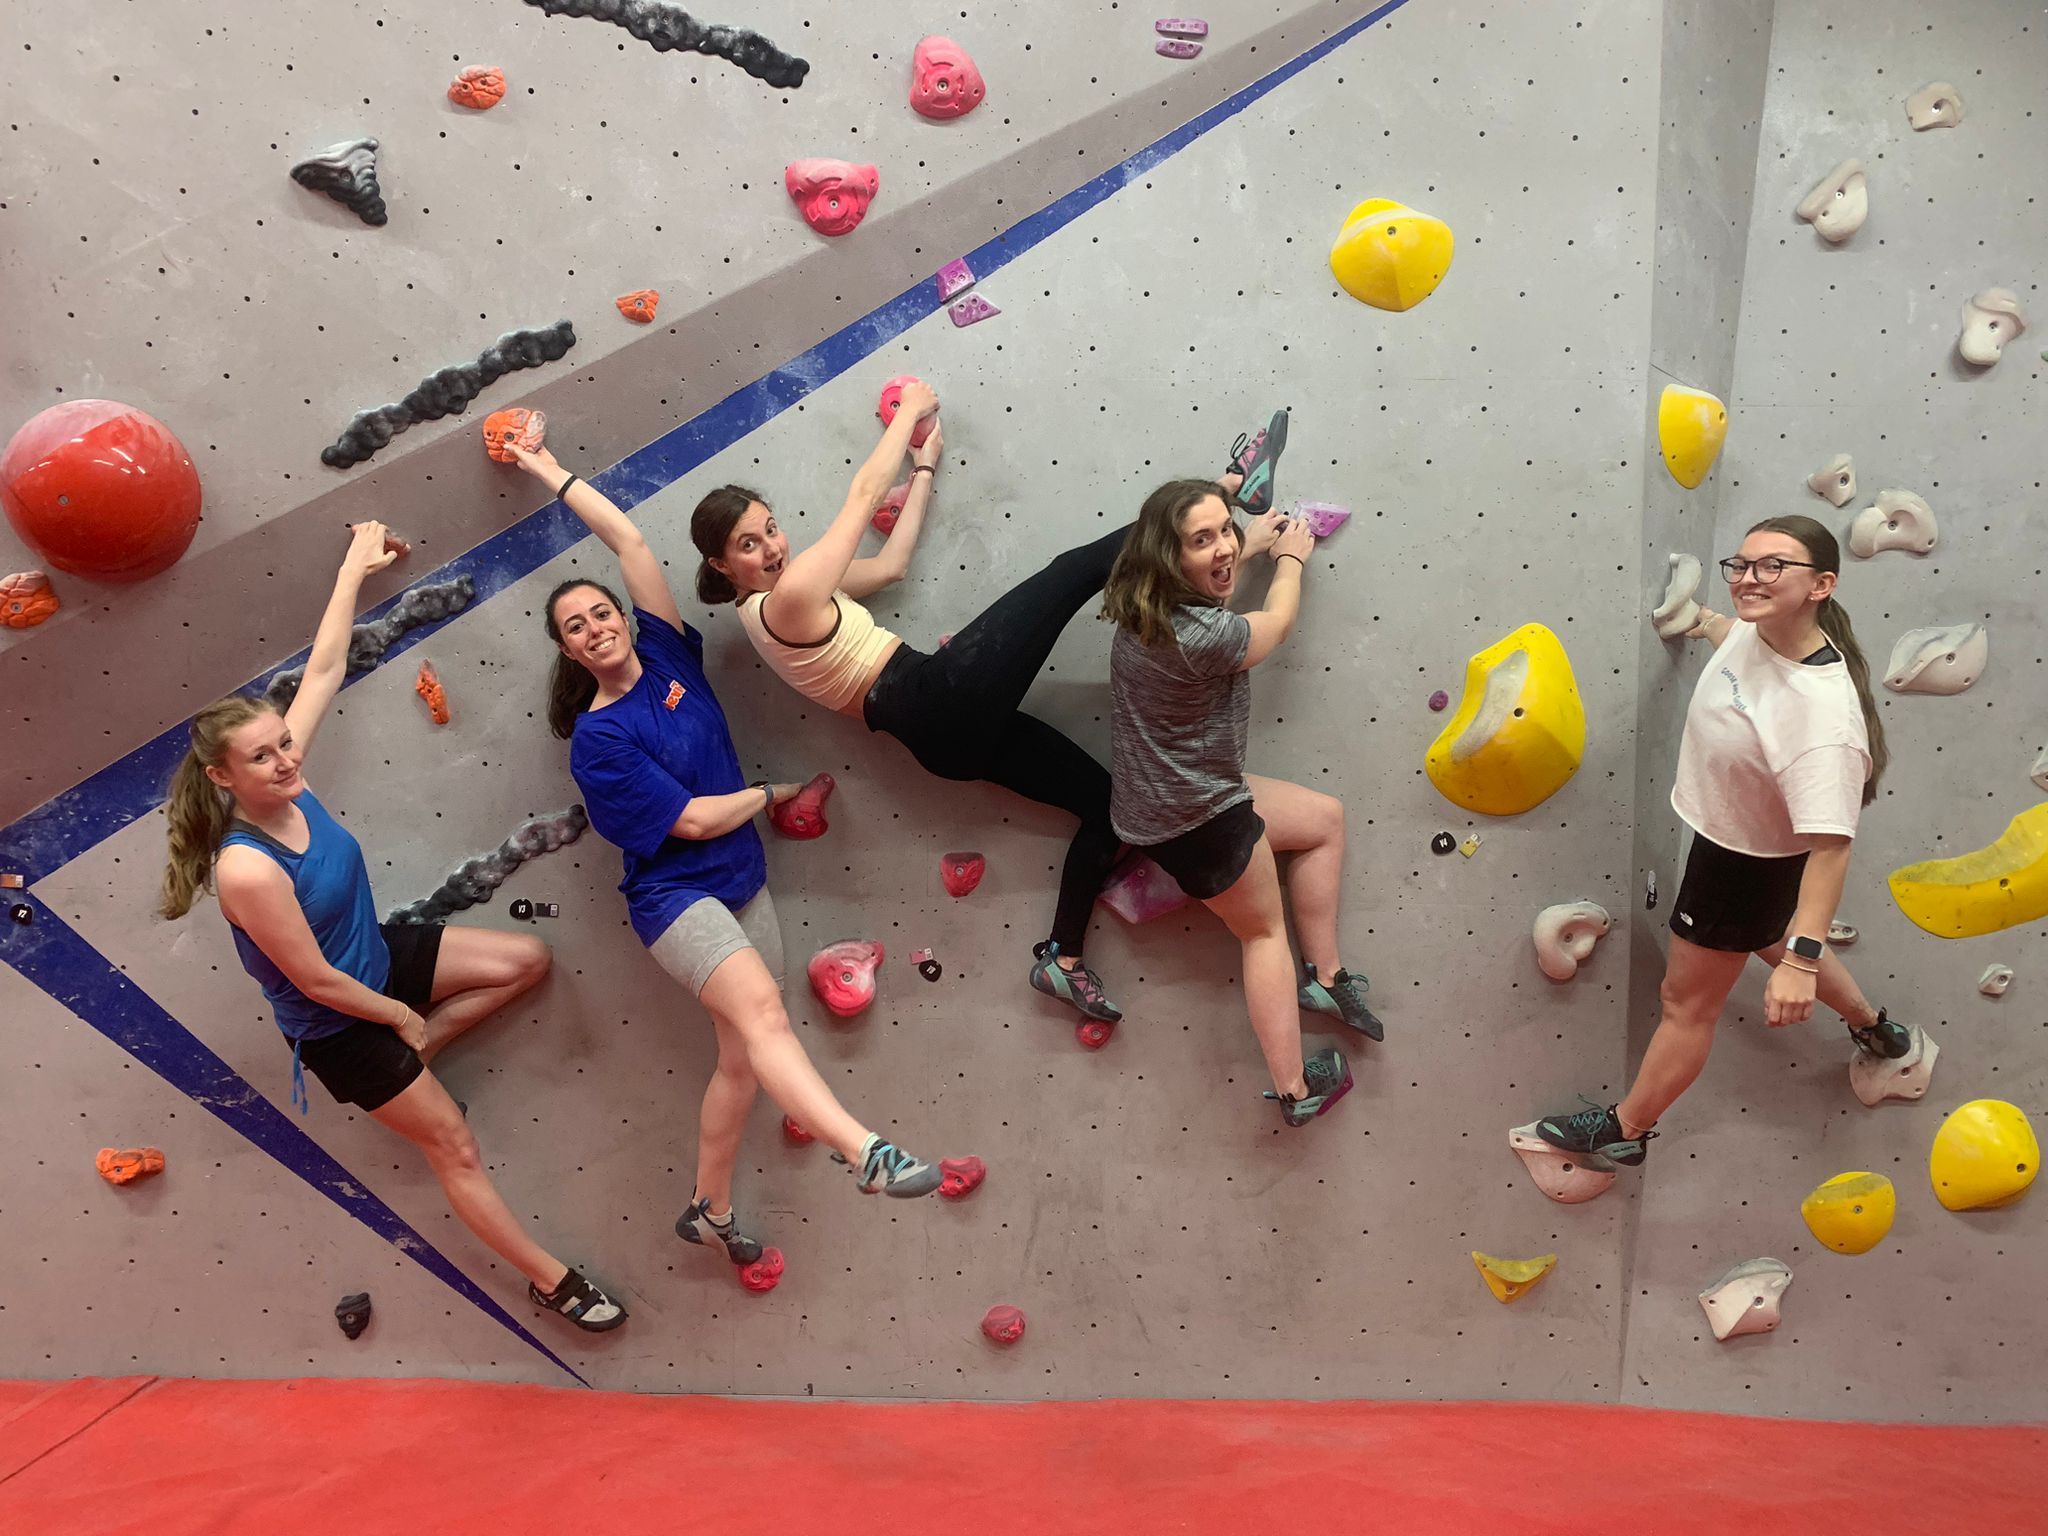 Climbers on a climbing wall having fun and smiling for the camera.